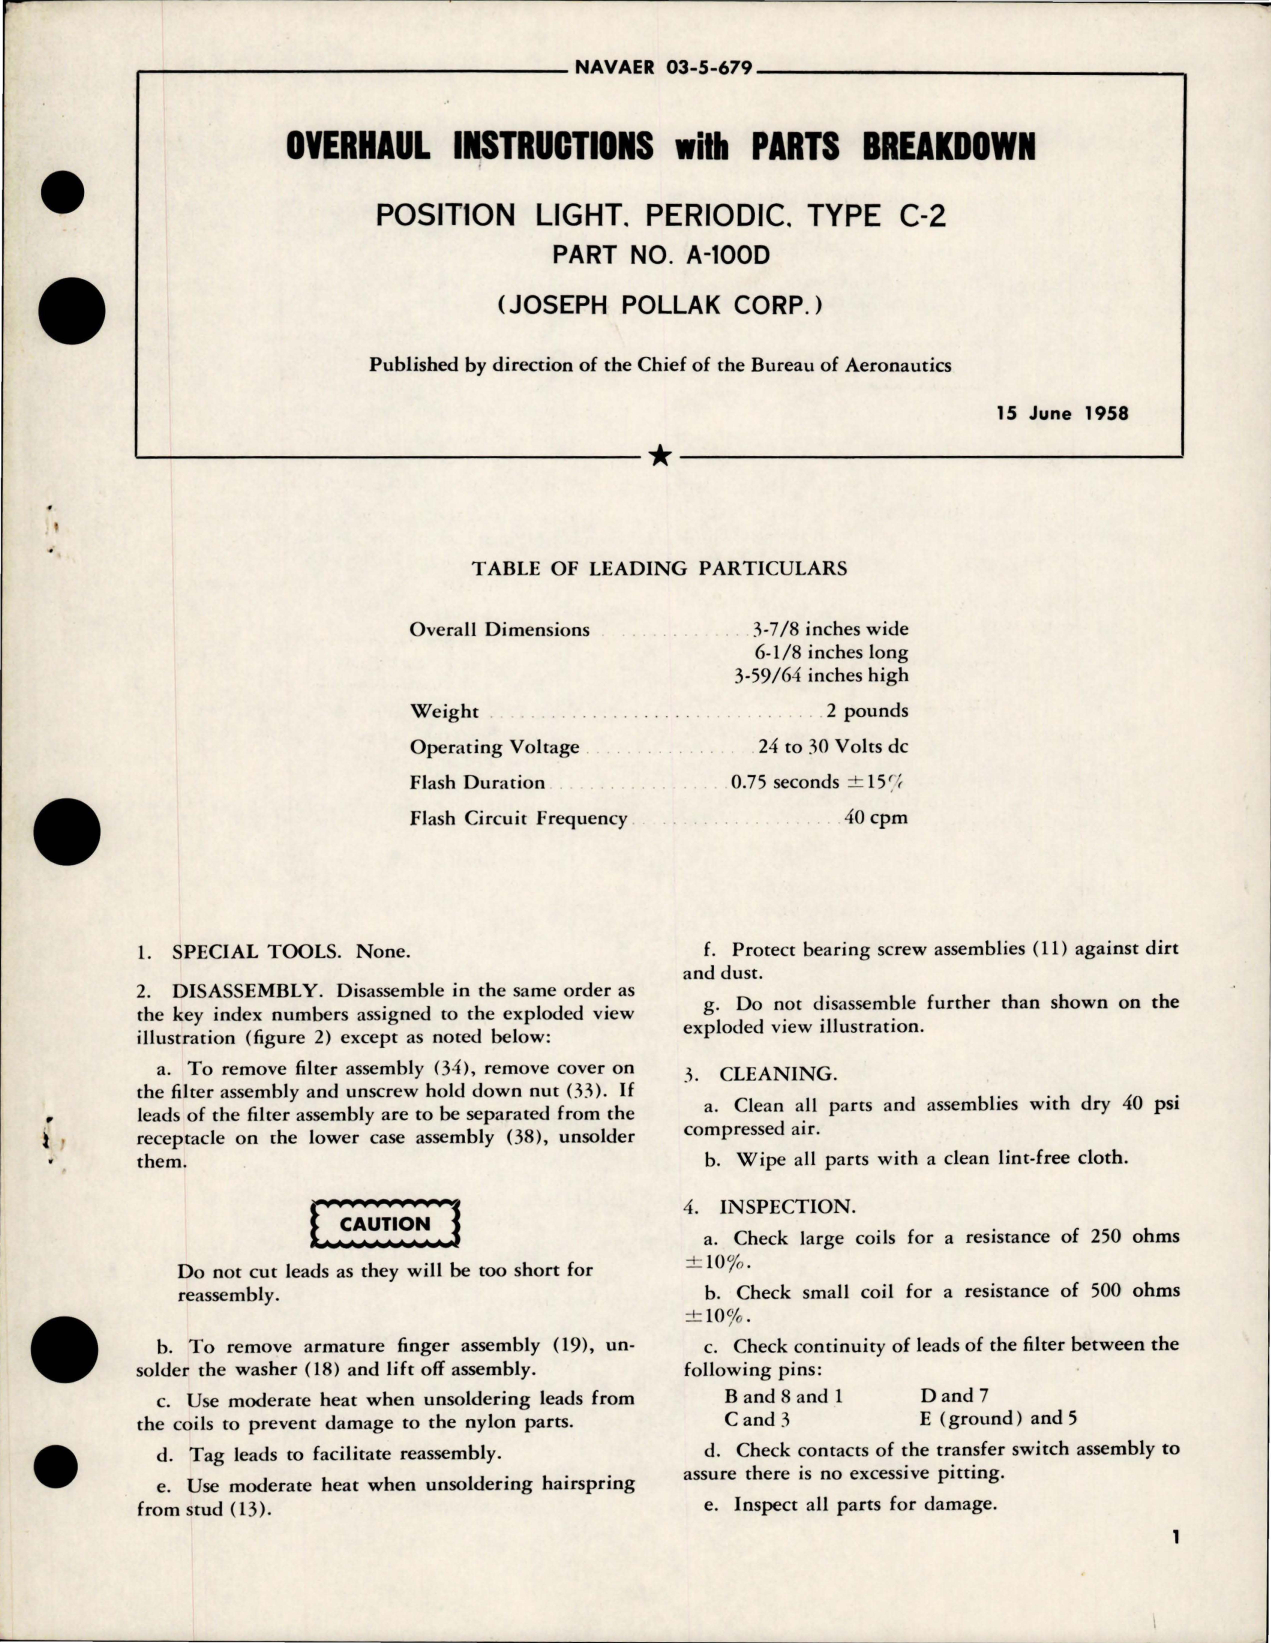 Sample page 1 from AirCorps Library document: Overhaul Instructions with Parts Breakdown for Periodic Position Light - Type C-2, Part A-100D 